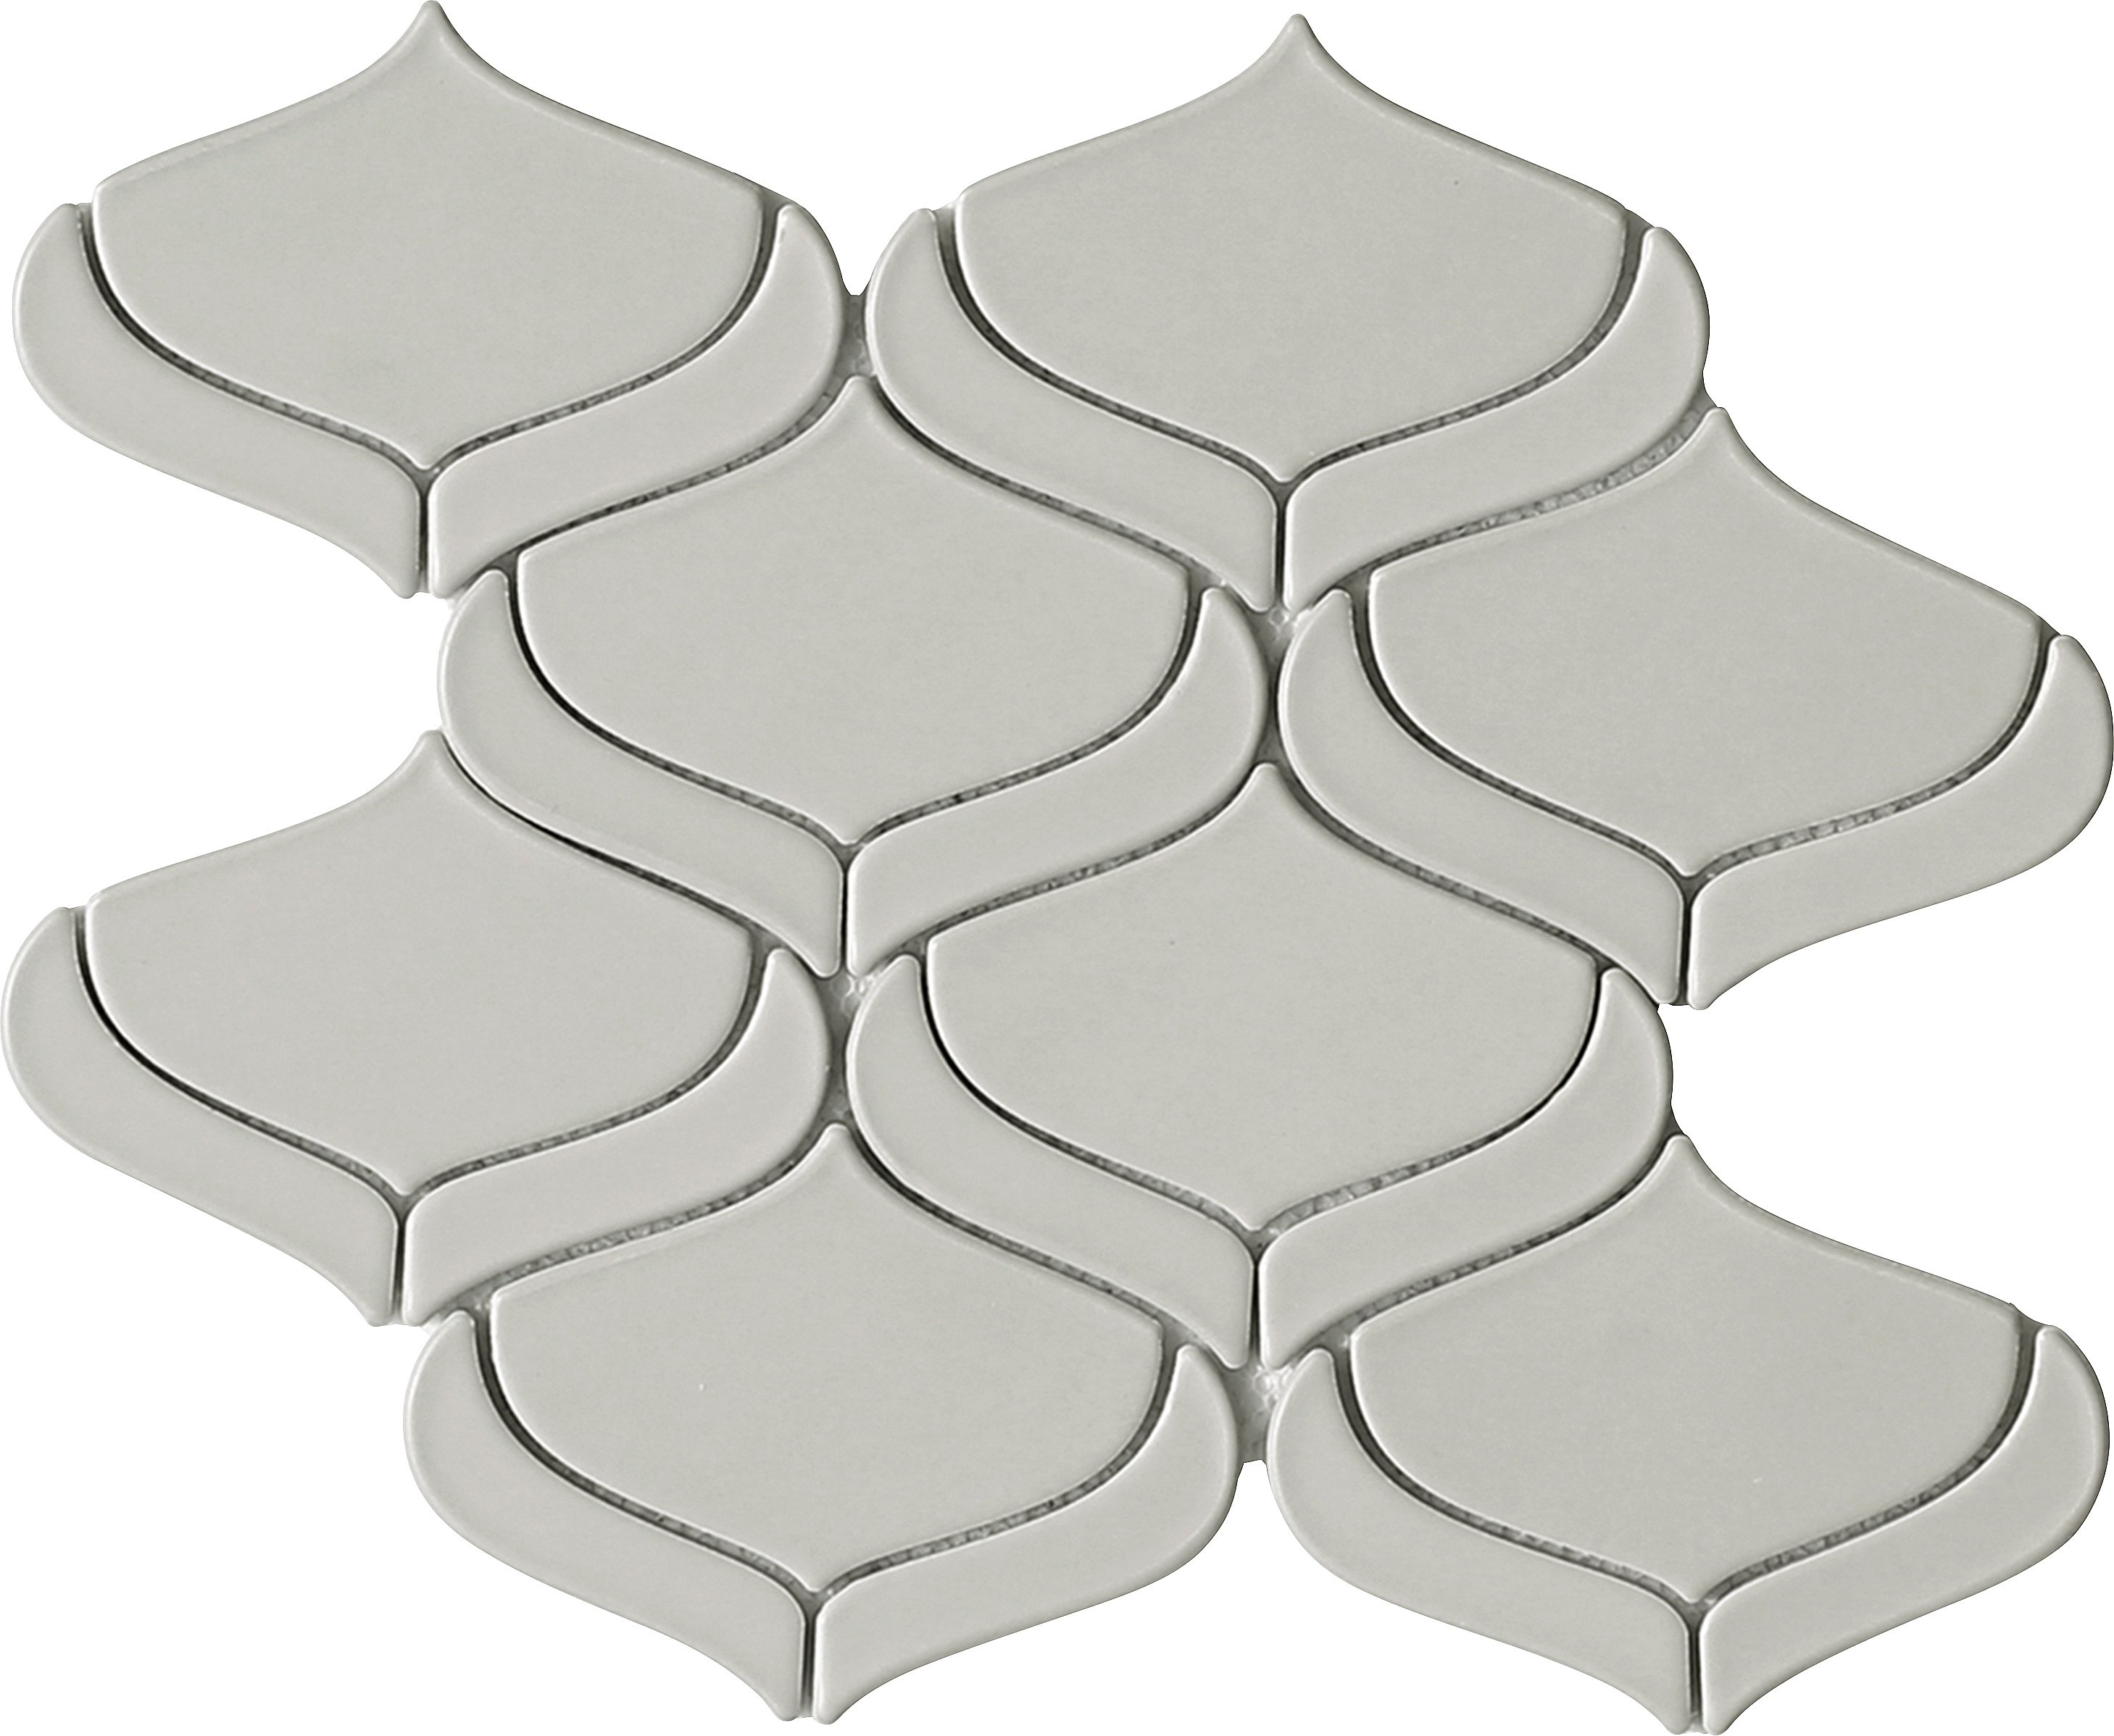 Emser Mythos Arabesque Gray ceramic mosaic tile 11x12 grey W94MYTSARGR1112MOV2 is an artistic mosaic wall tile. Emser Mythos mosaic tile is a Emser product.  Emser Mythos Ceramic mosaic tile collection comes in Arabesque, Petals and Curves mosaic design. 